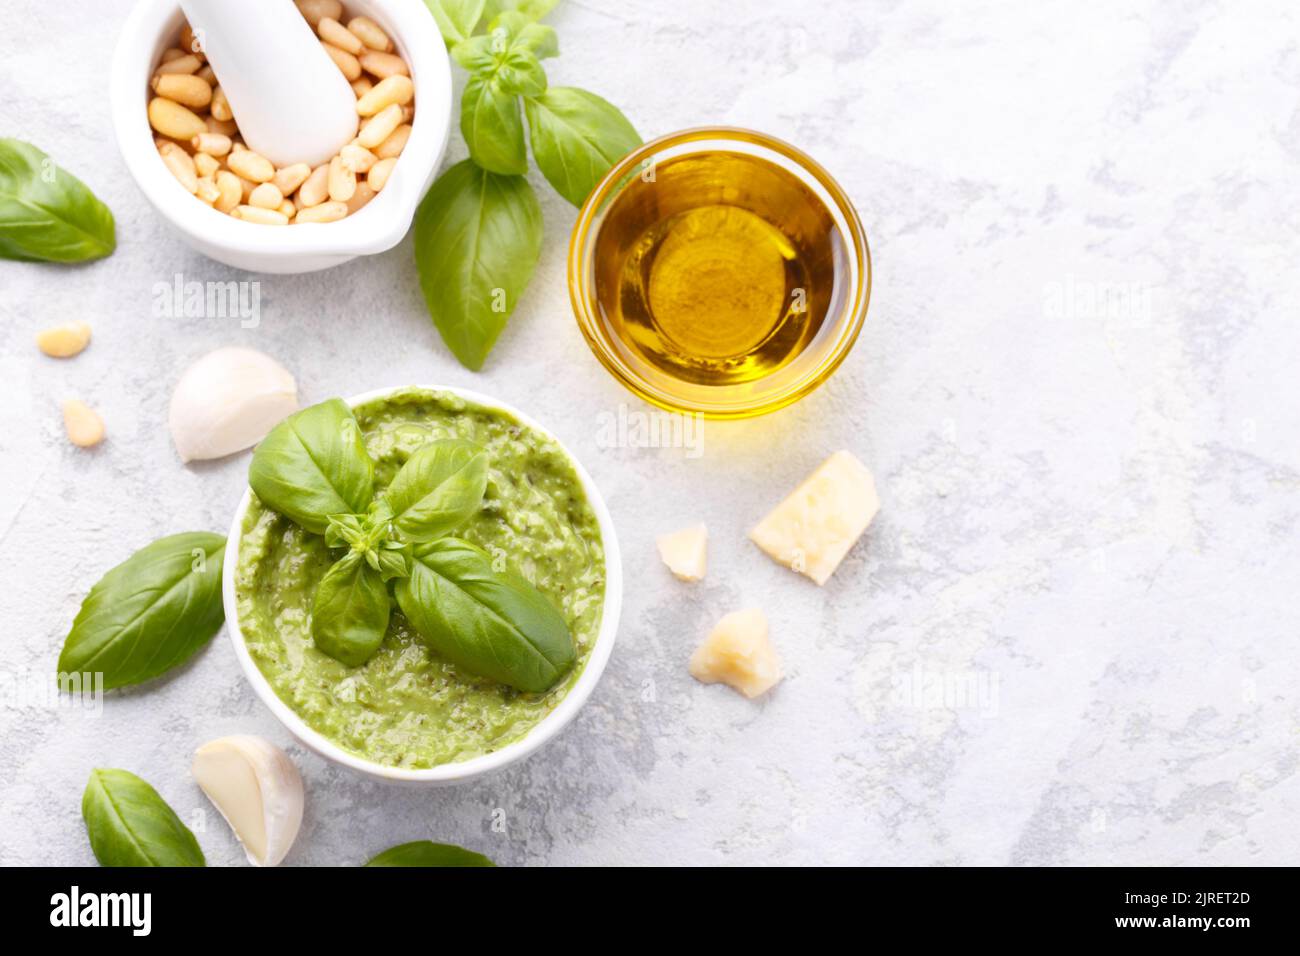 Pesto sauce and ingredients, cheese, basil, garlic, pine nuts, olive oil on grey stone background with copy space Stock Photo